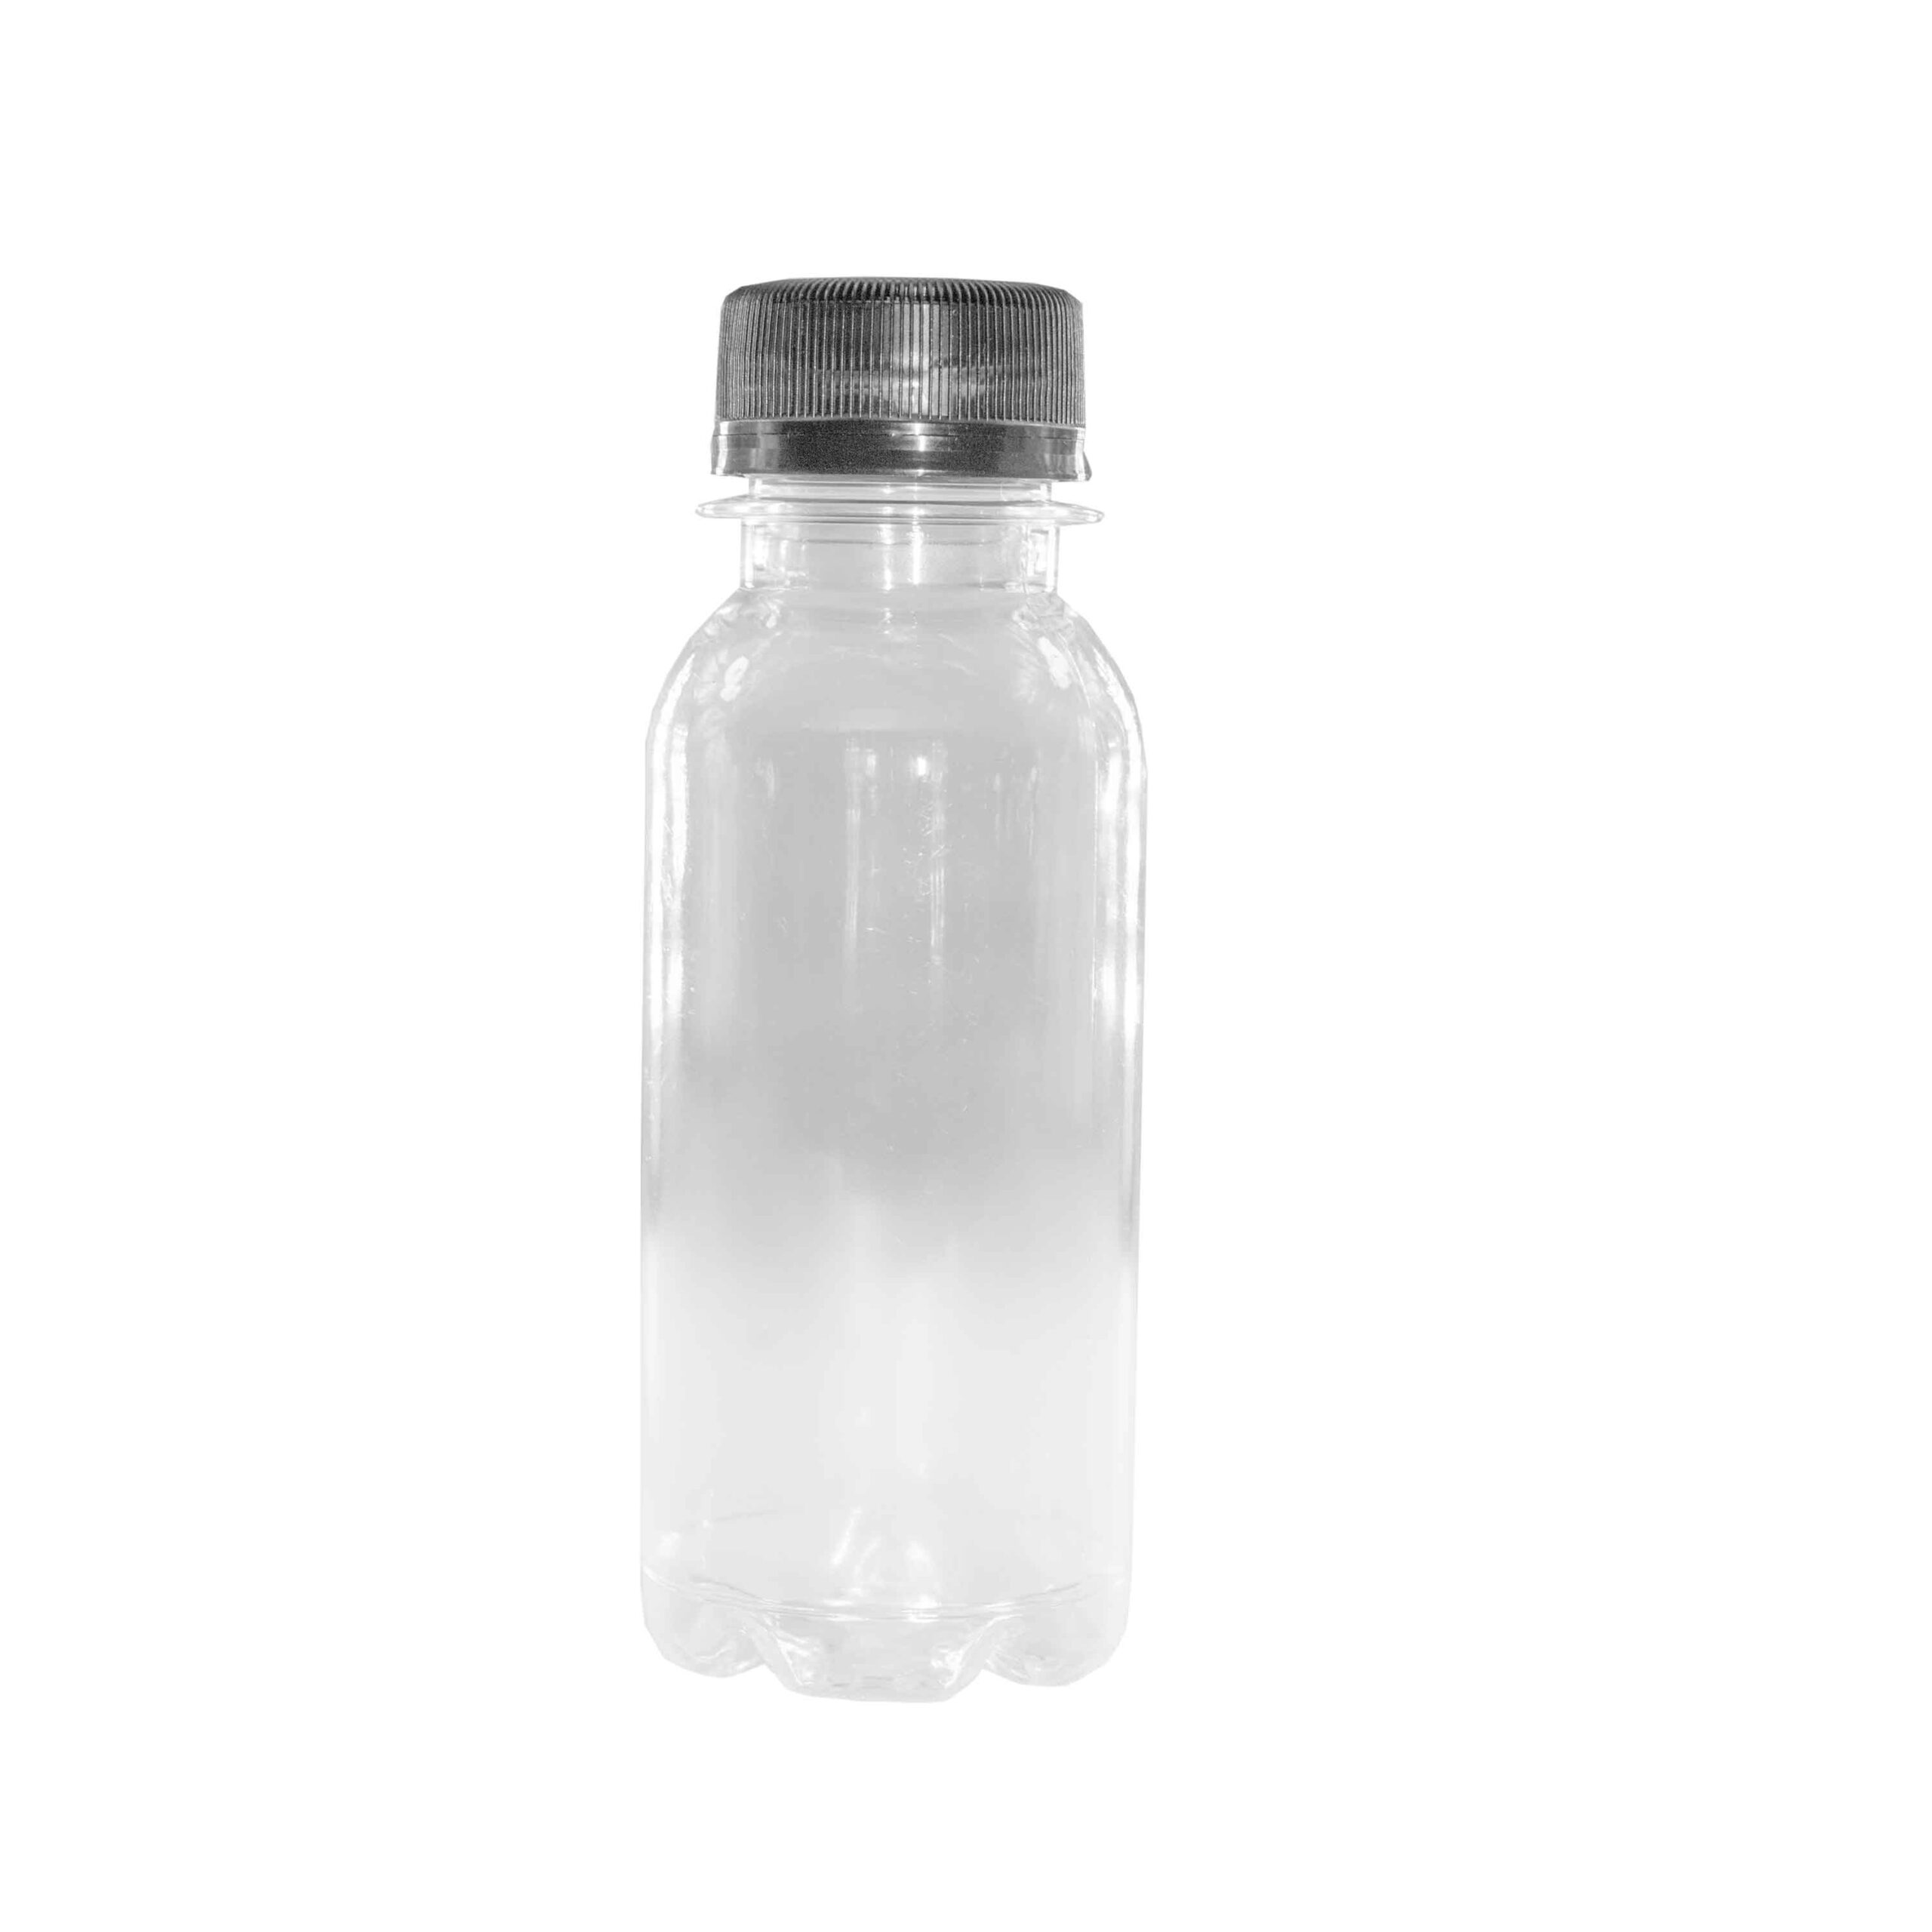 PLASTIC SHORT
NECK ROUND
BOTTLE WITH LID
100ml (1x10)